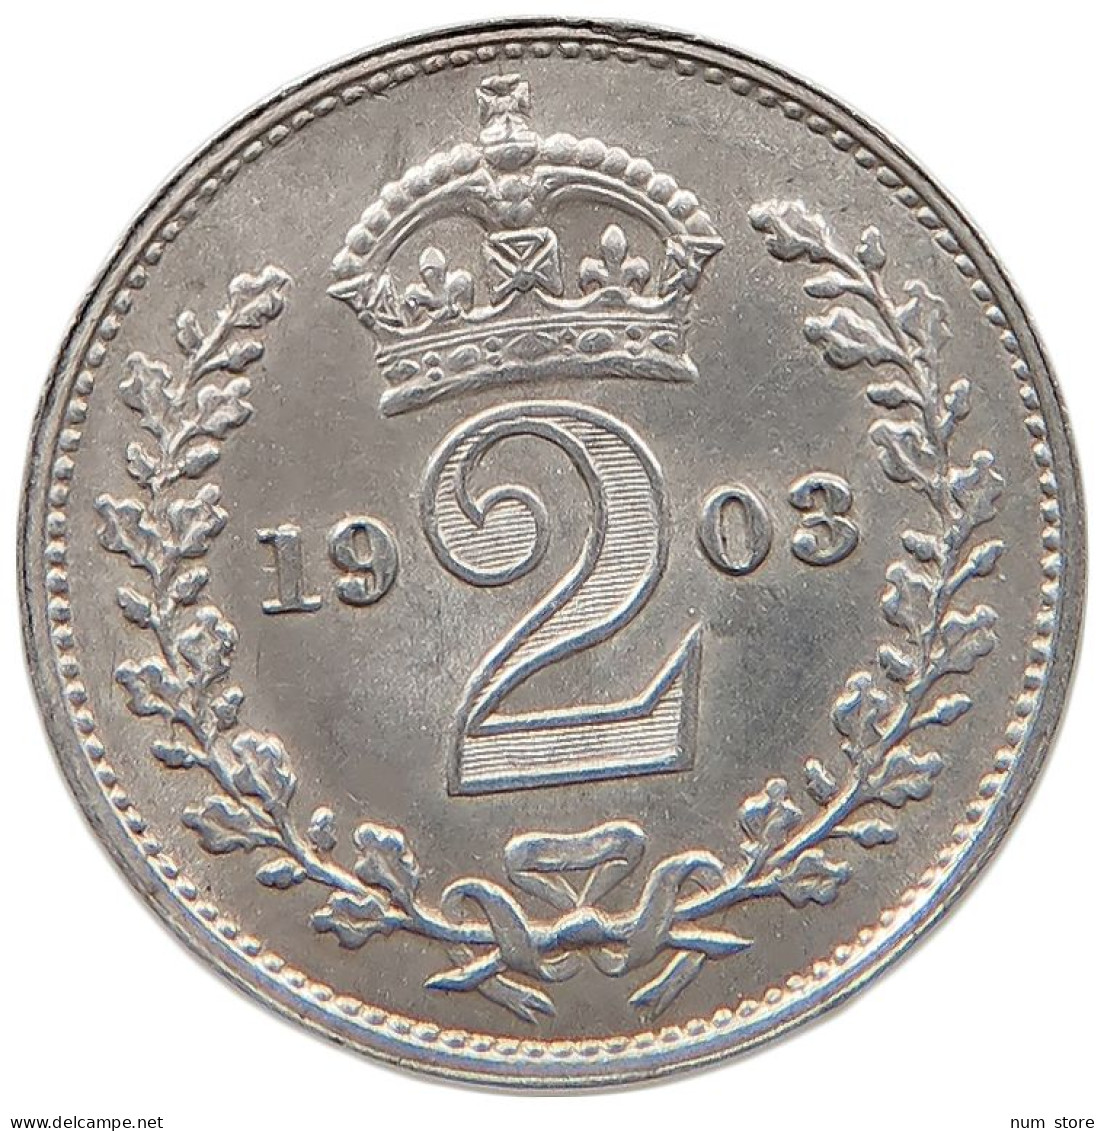 GREAT BRITAIN TWOPENCE MAUNDY 1903 Edward VII., 1901 - 1910 #t143 0667 - E. 2 Pence